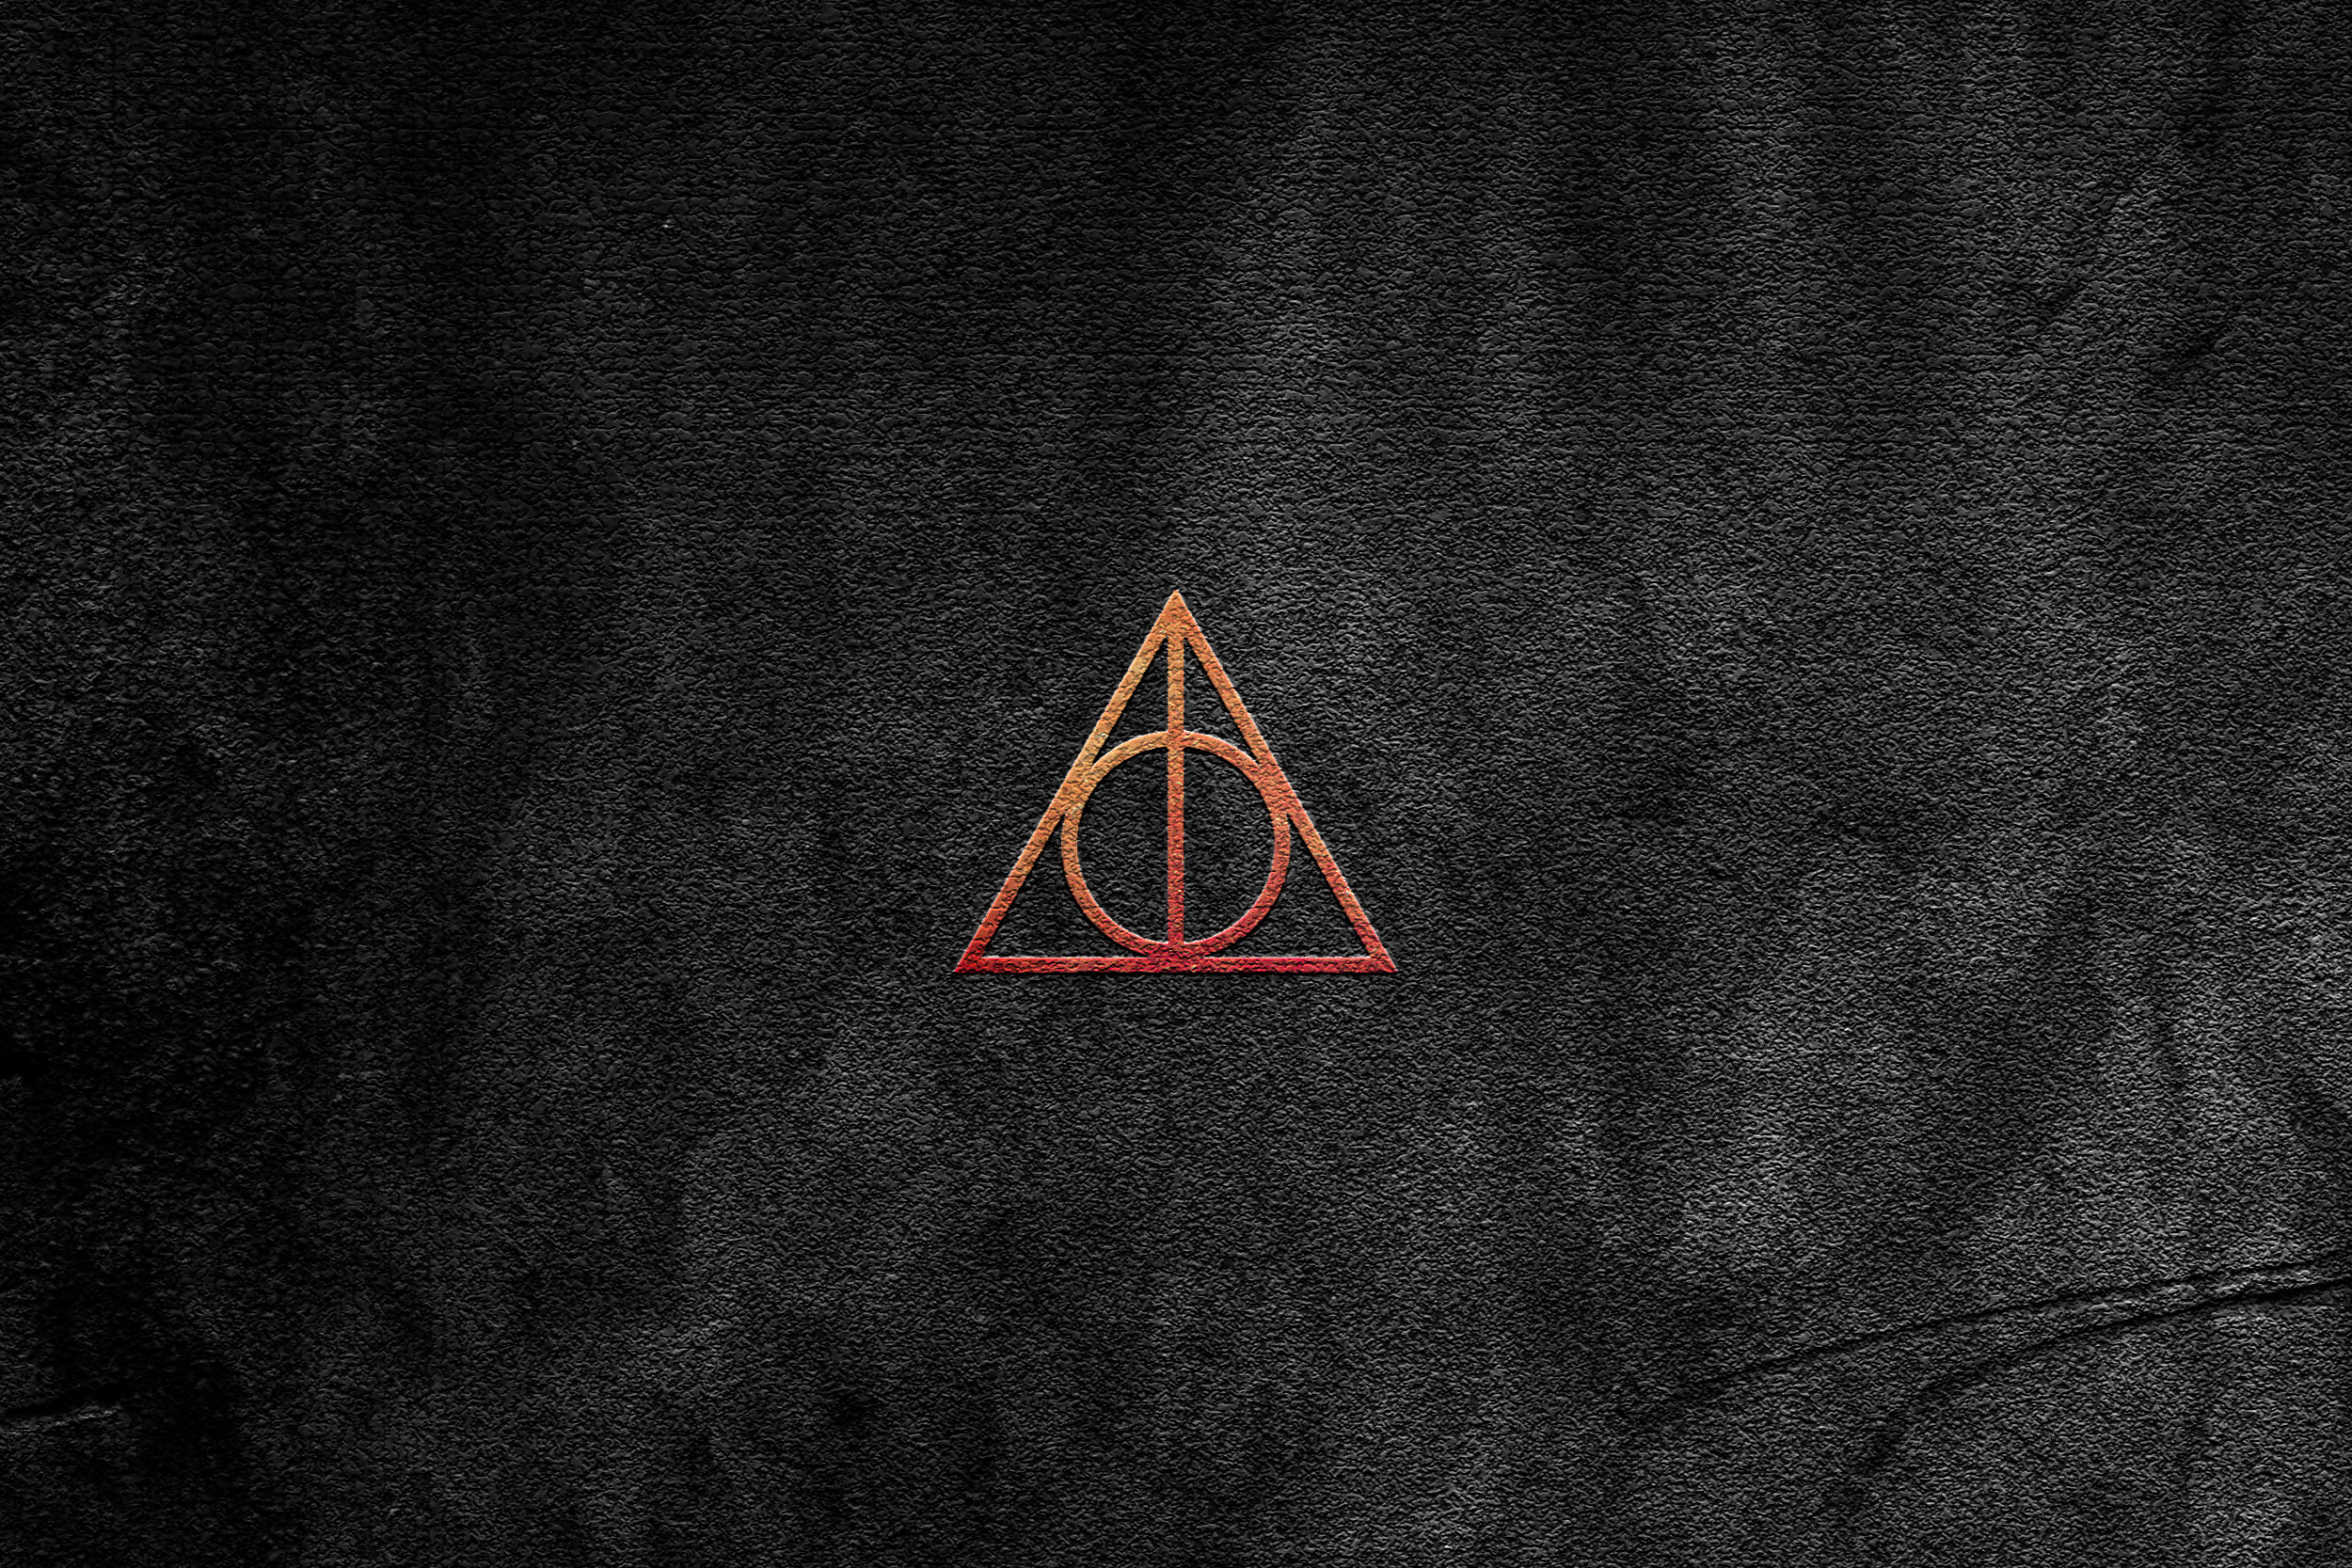 Deathly Hallows Symbol Wallpaper 56 images